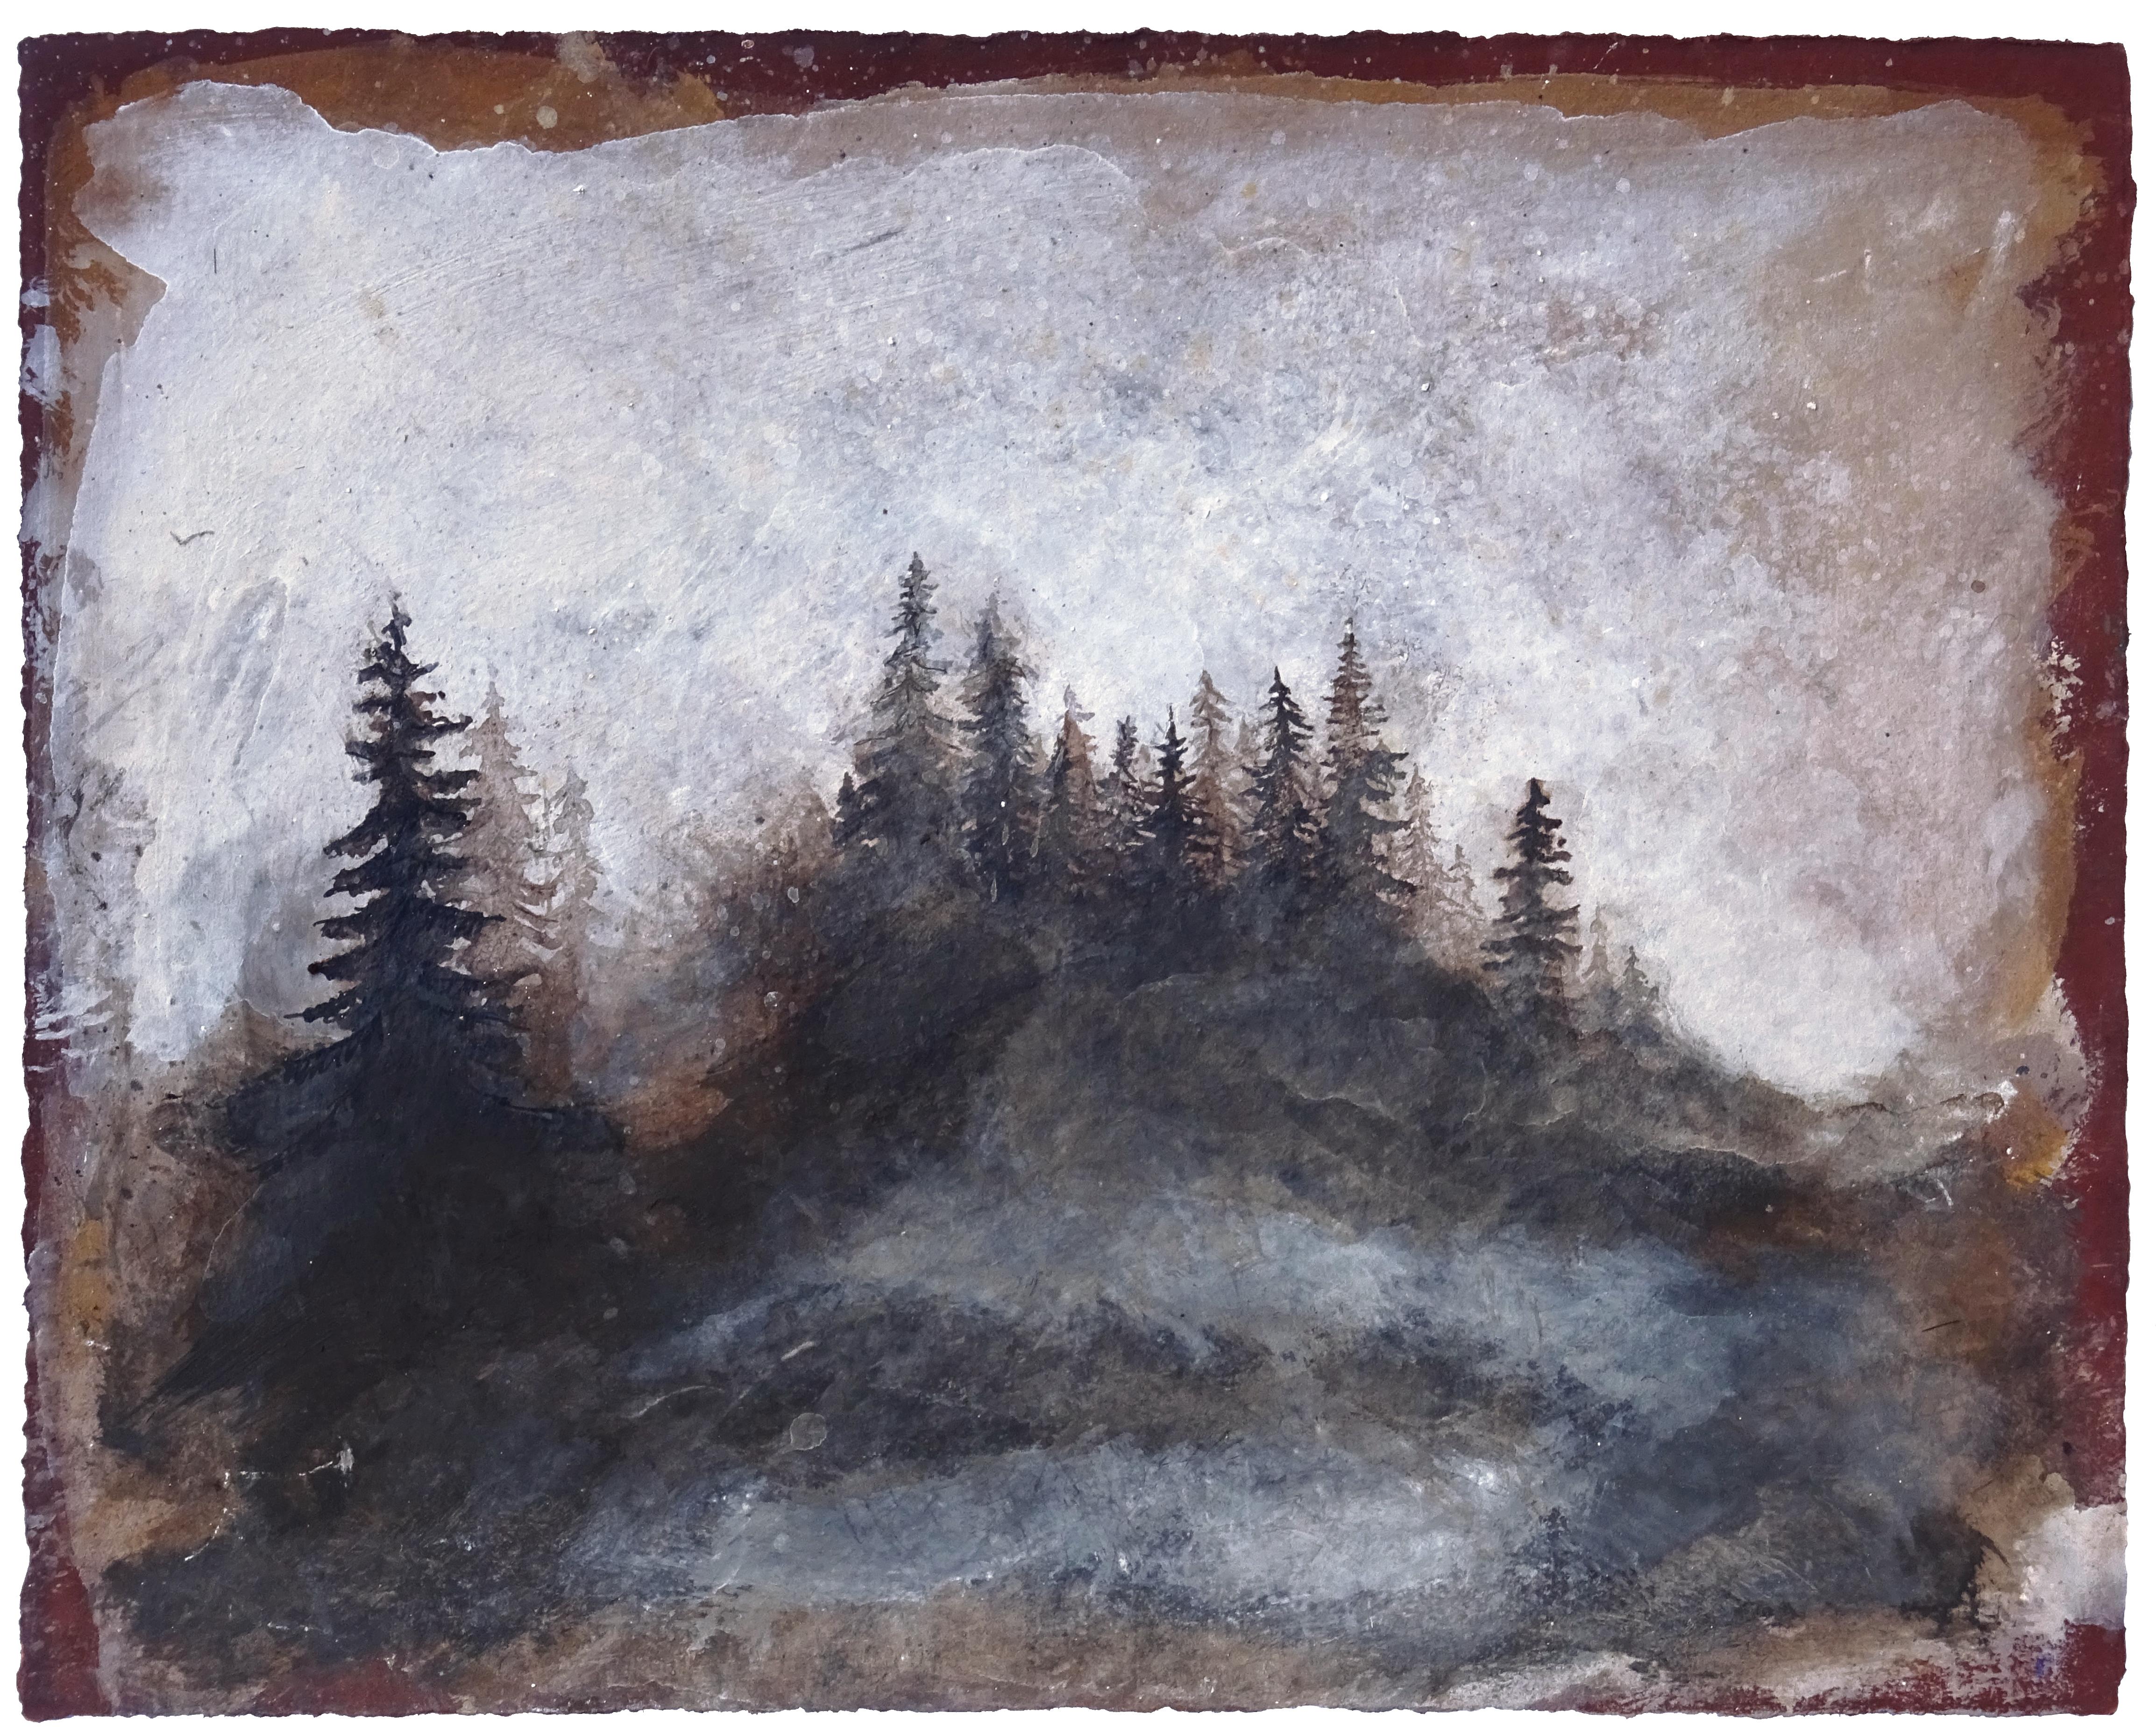 Frank Girard Landscape Art - "The Faraway Forest",  Pigments Watercolor Acrylic Paper Drawing 